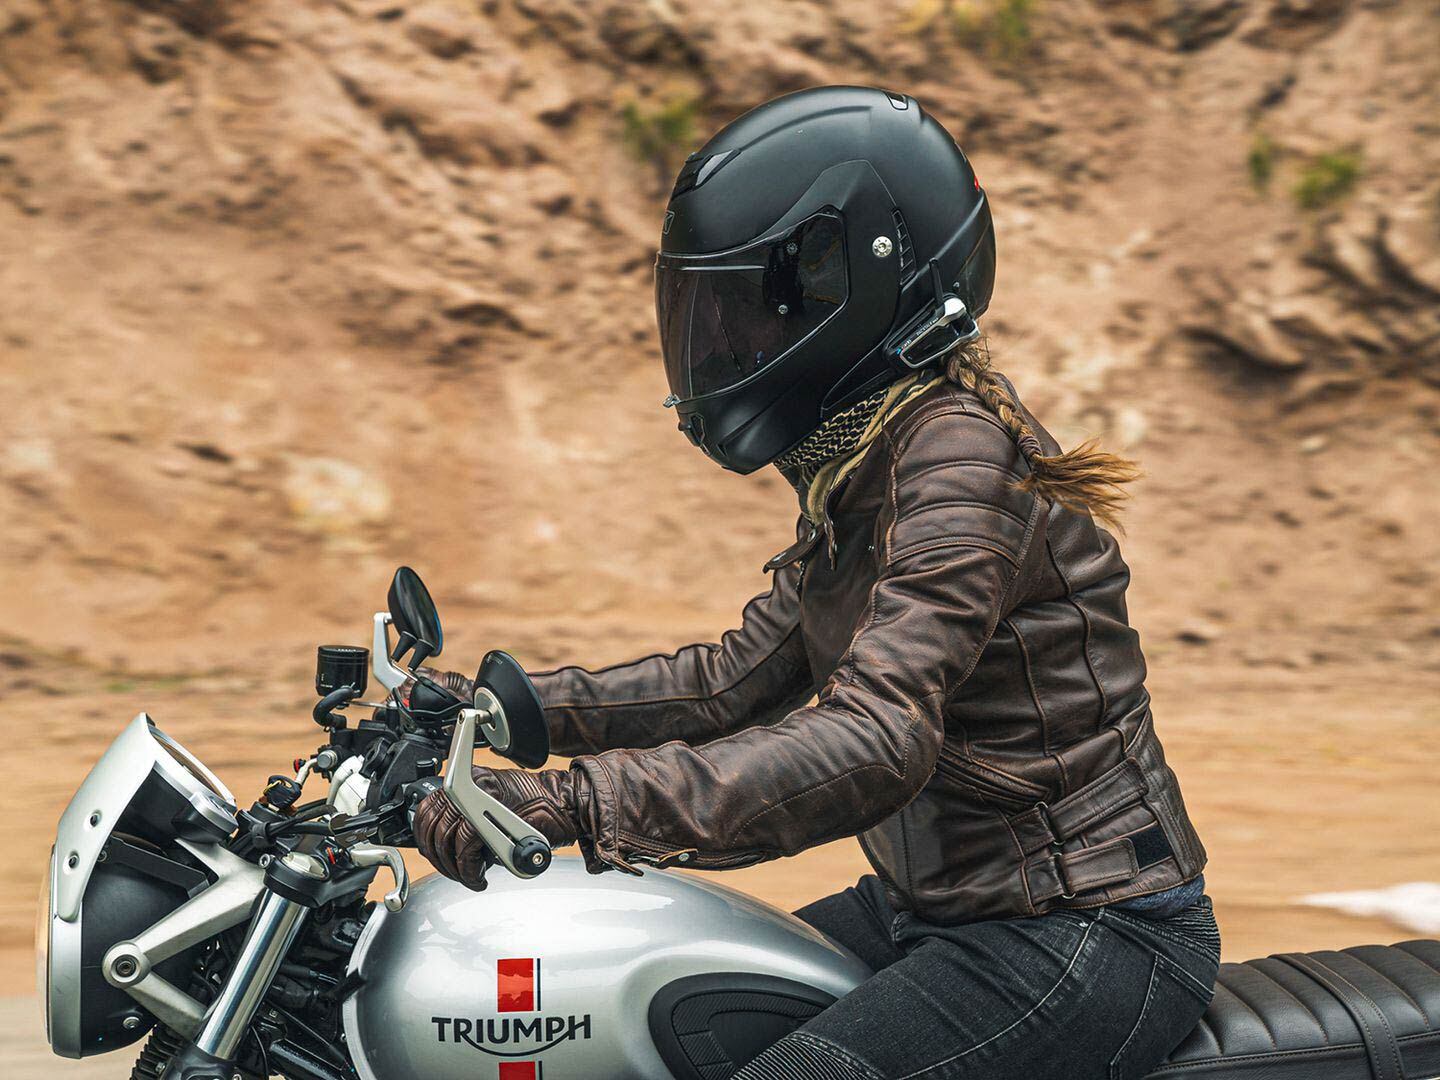 In-helmet communication systems give riders access to phone calls, music, and more.